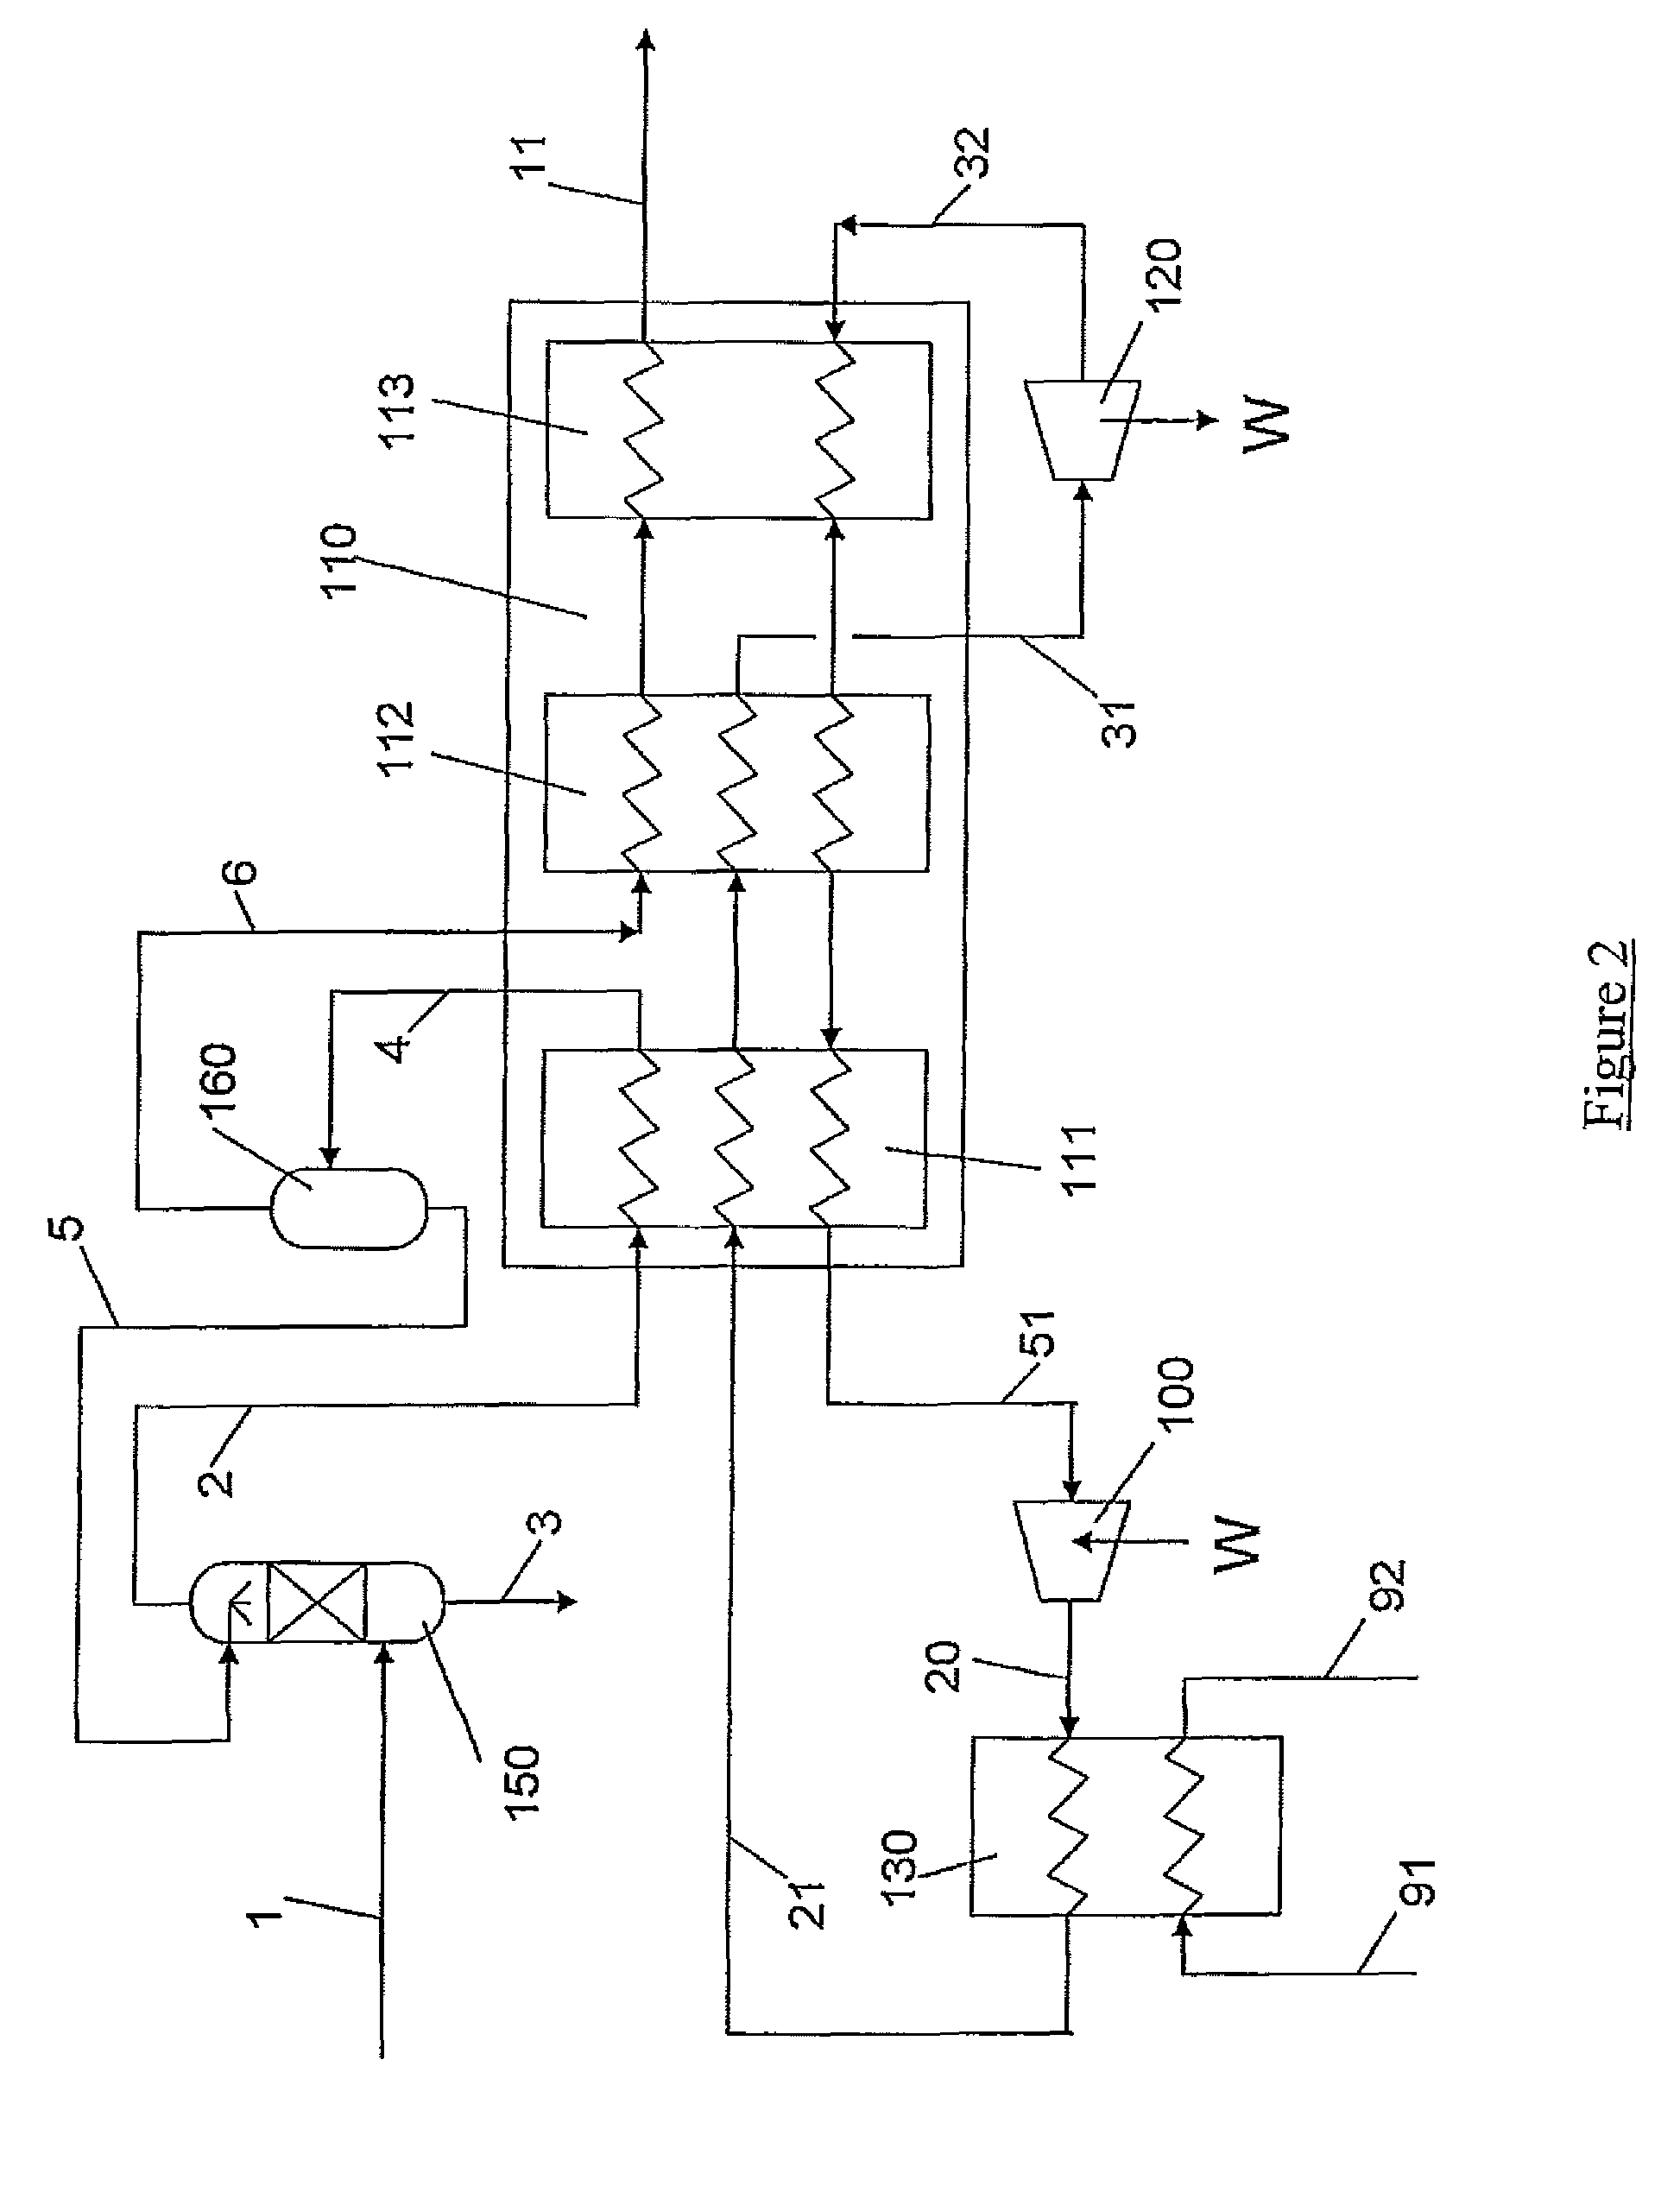 Method and system for producing liquefied natural gas (LNG)